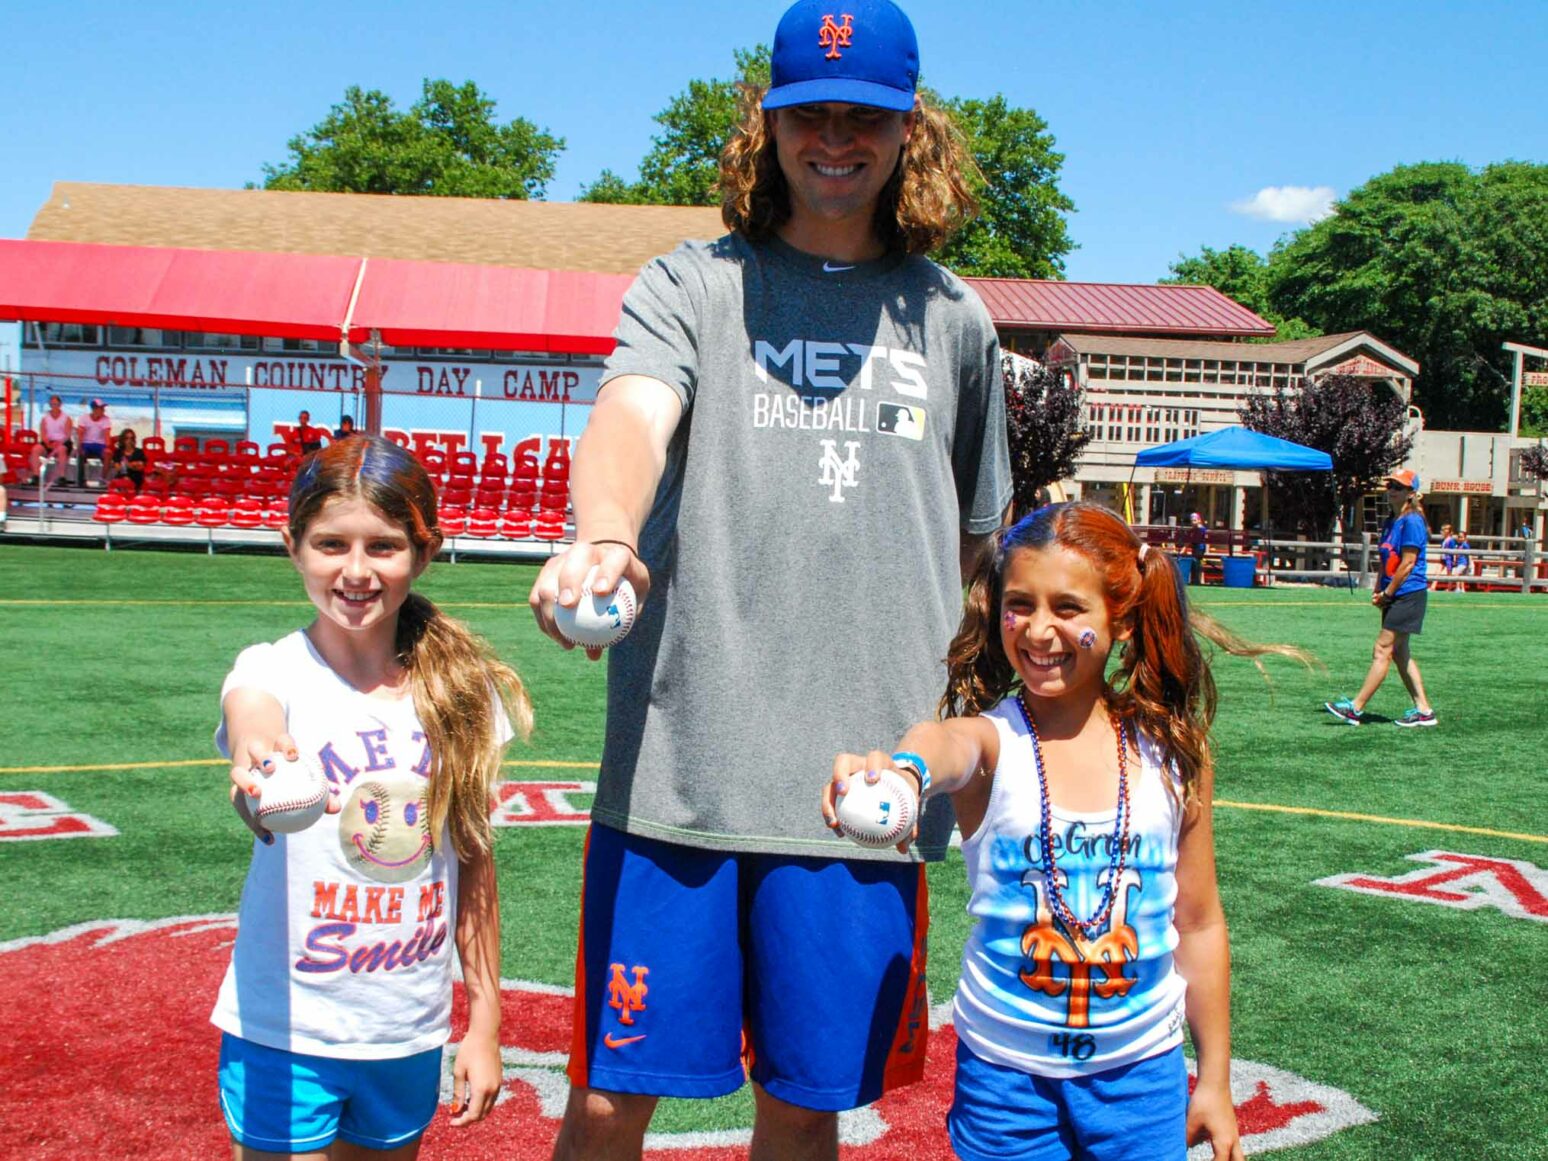 Two young campers hold out baseballs with Jacob deGrom